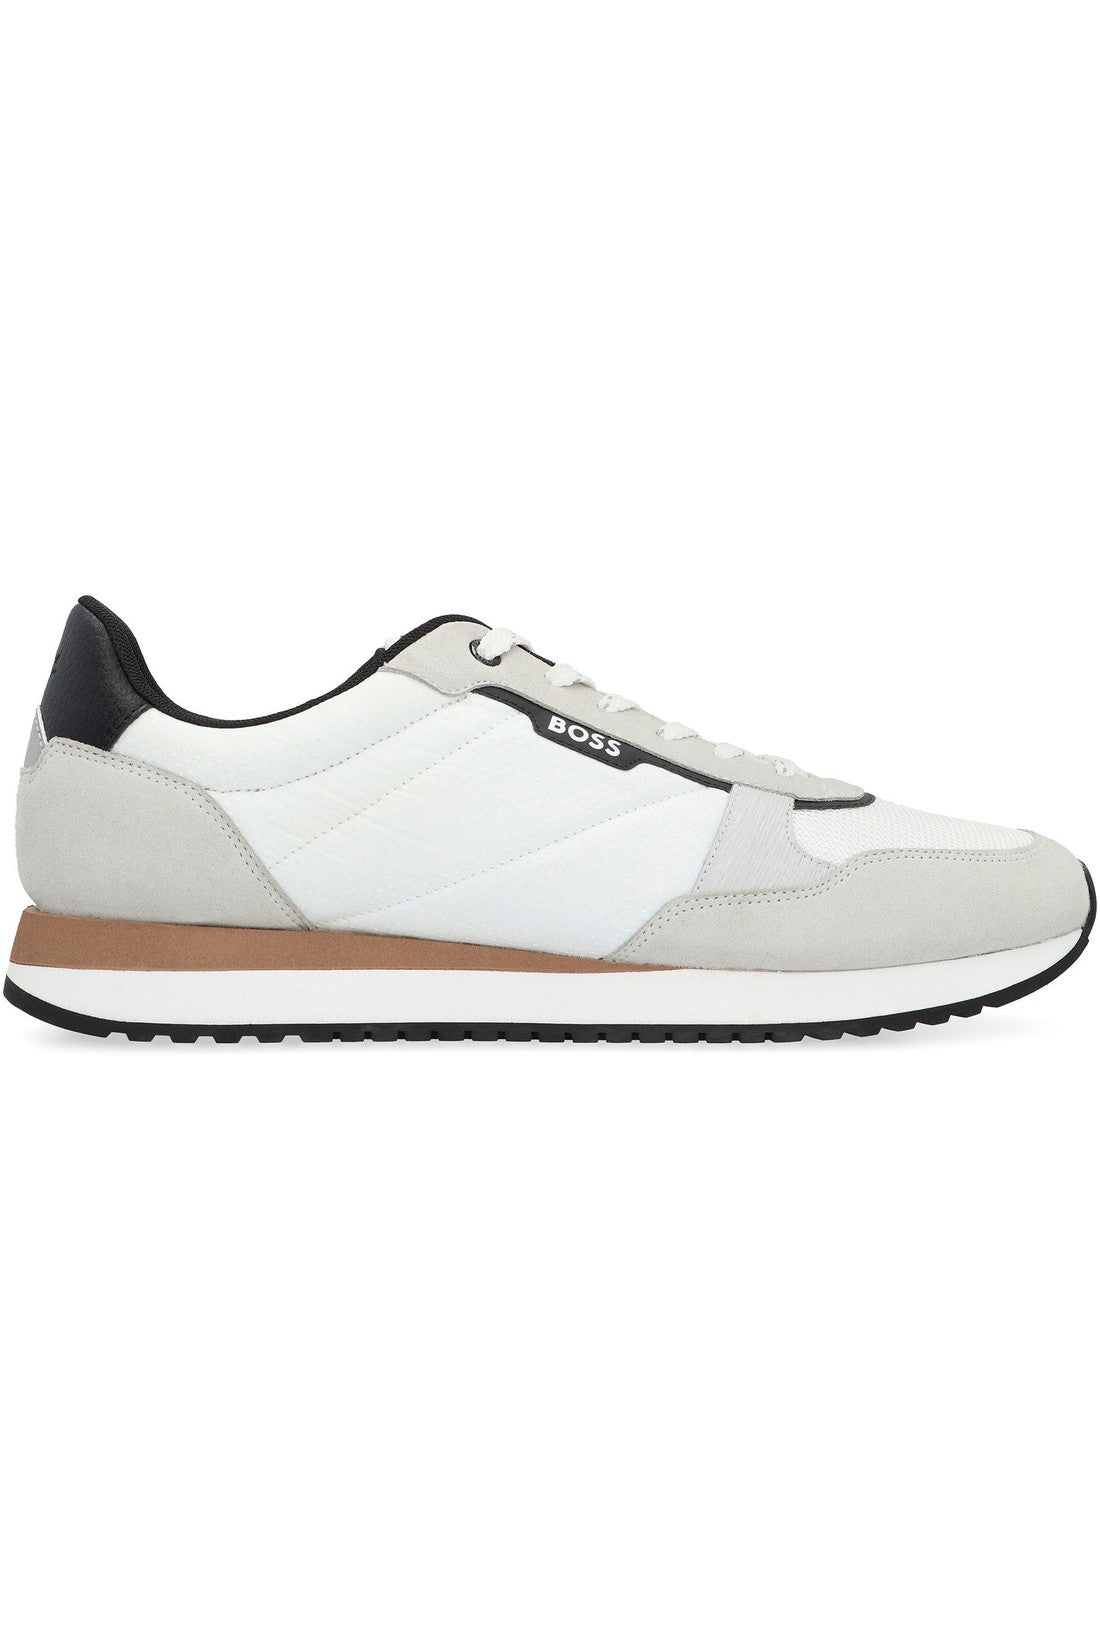 BOSS-OUTLET-SALE-Kai Fabric low-top sneakers-ARCHIVIST